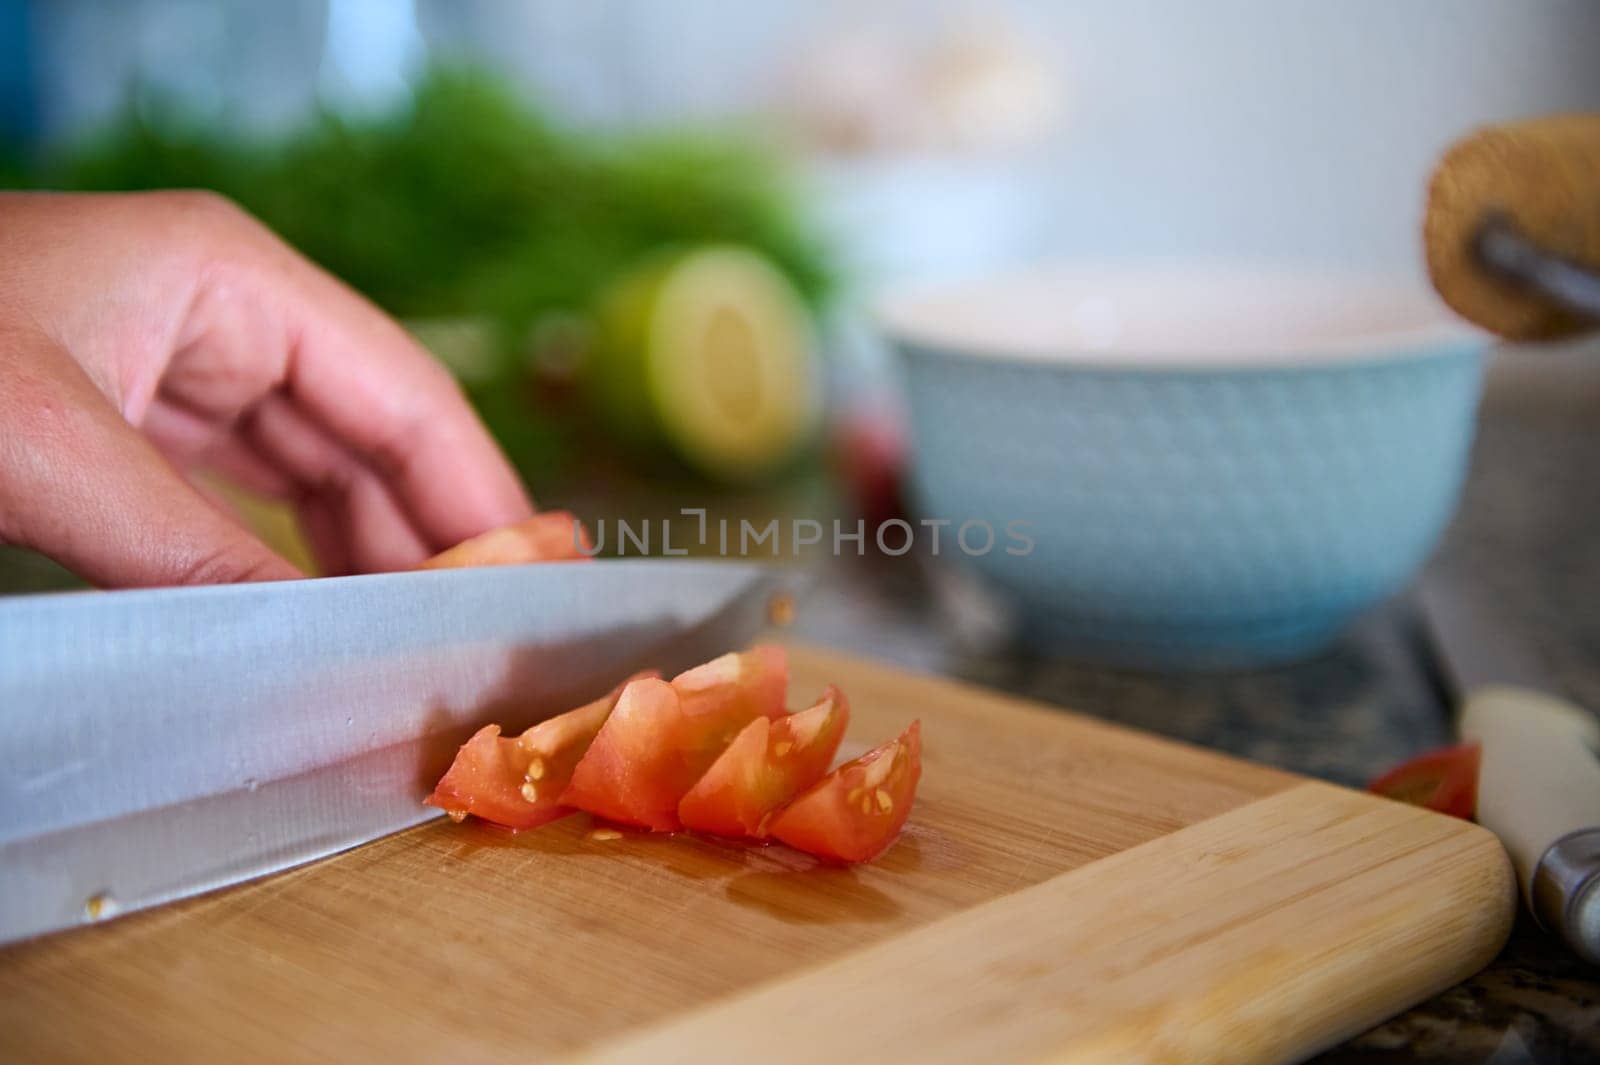 Cropped view of a chef cook slicing red juicy tomatoes on a wooden cutting board. Food background. The process of preparing a fresh healthy salad